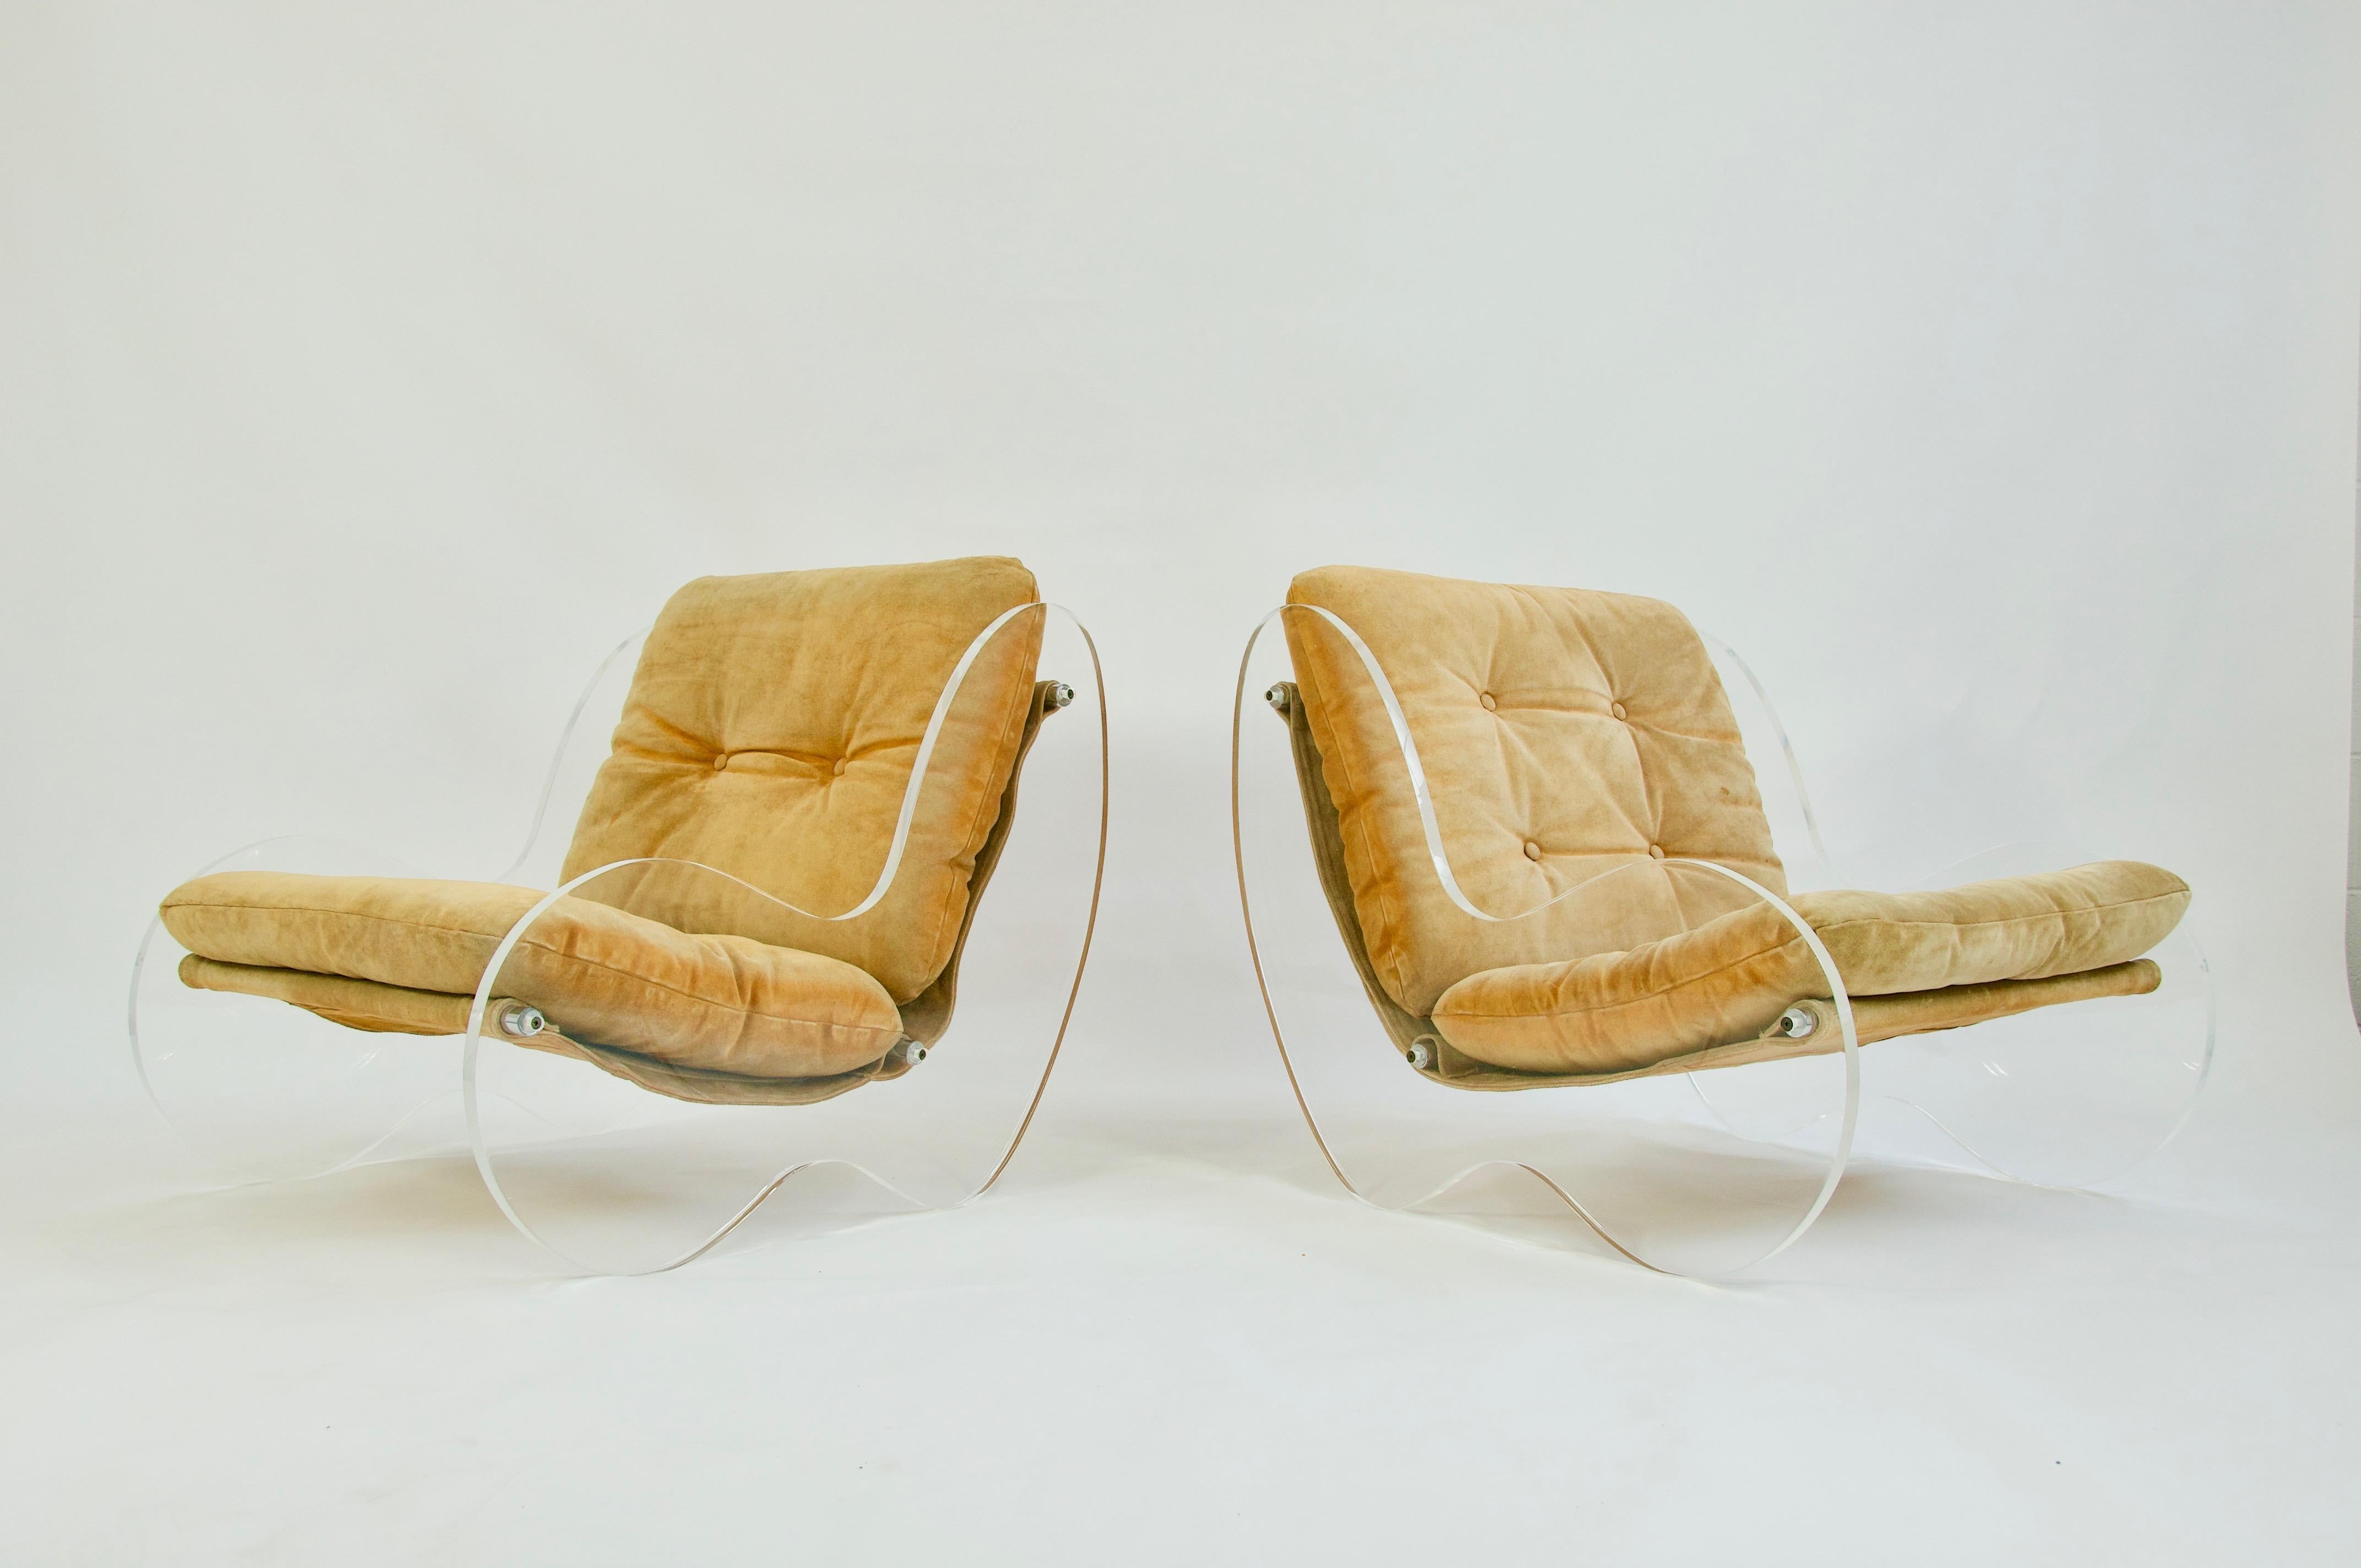 Offered by OLIVER MODERN Rare pair of sculptural Lucite lounge chairs by Poul Norreklit. Original suede sling seating. Lucite has been polished.